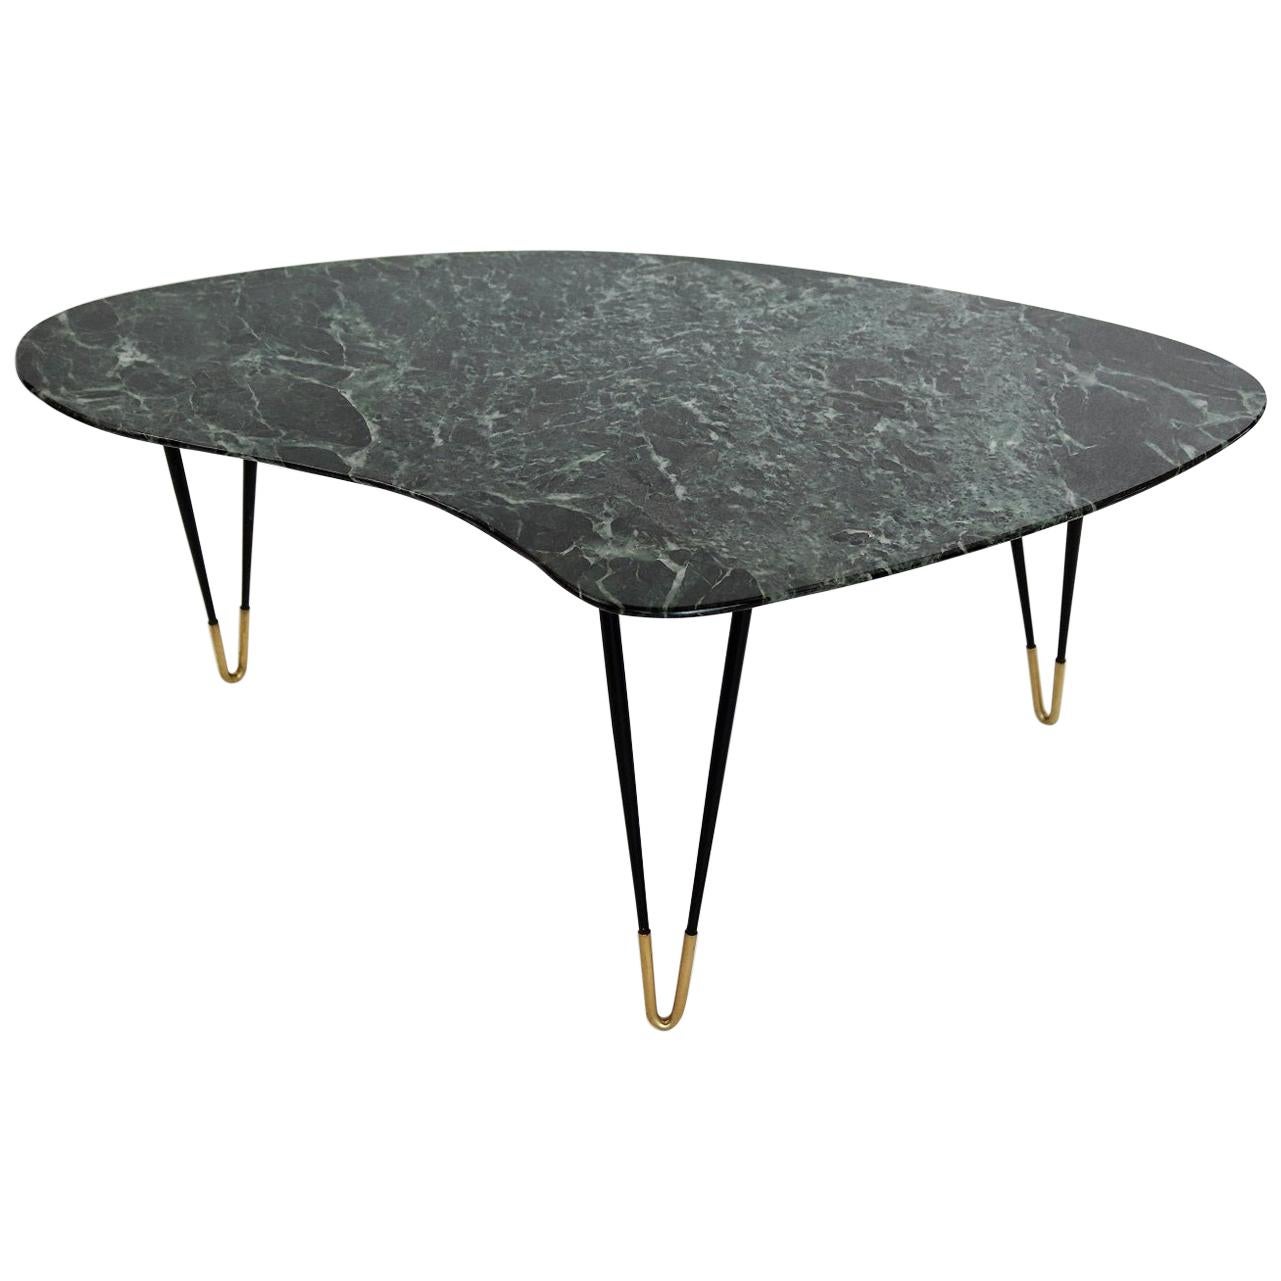 Italian Midcentury Coffee Table with Green Alps Marble Top and Brass Feet, 1950s